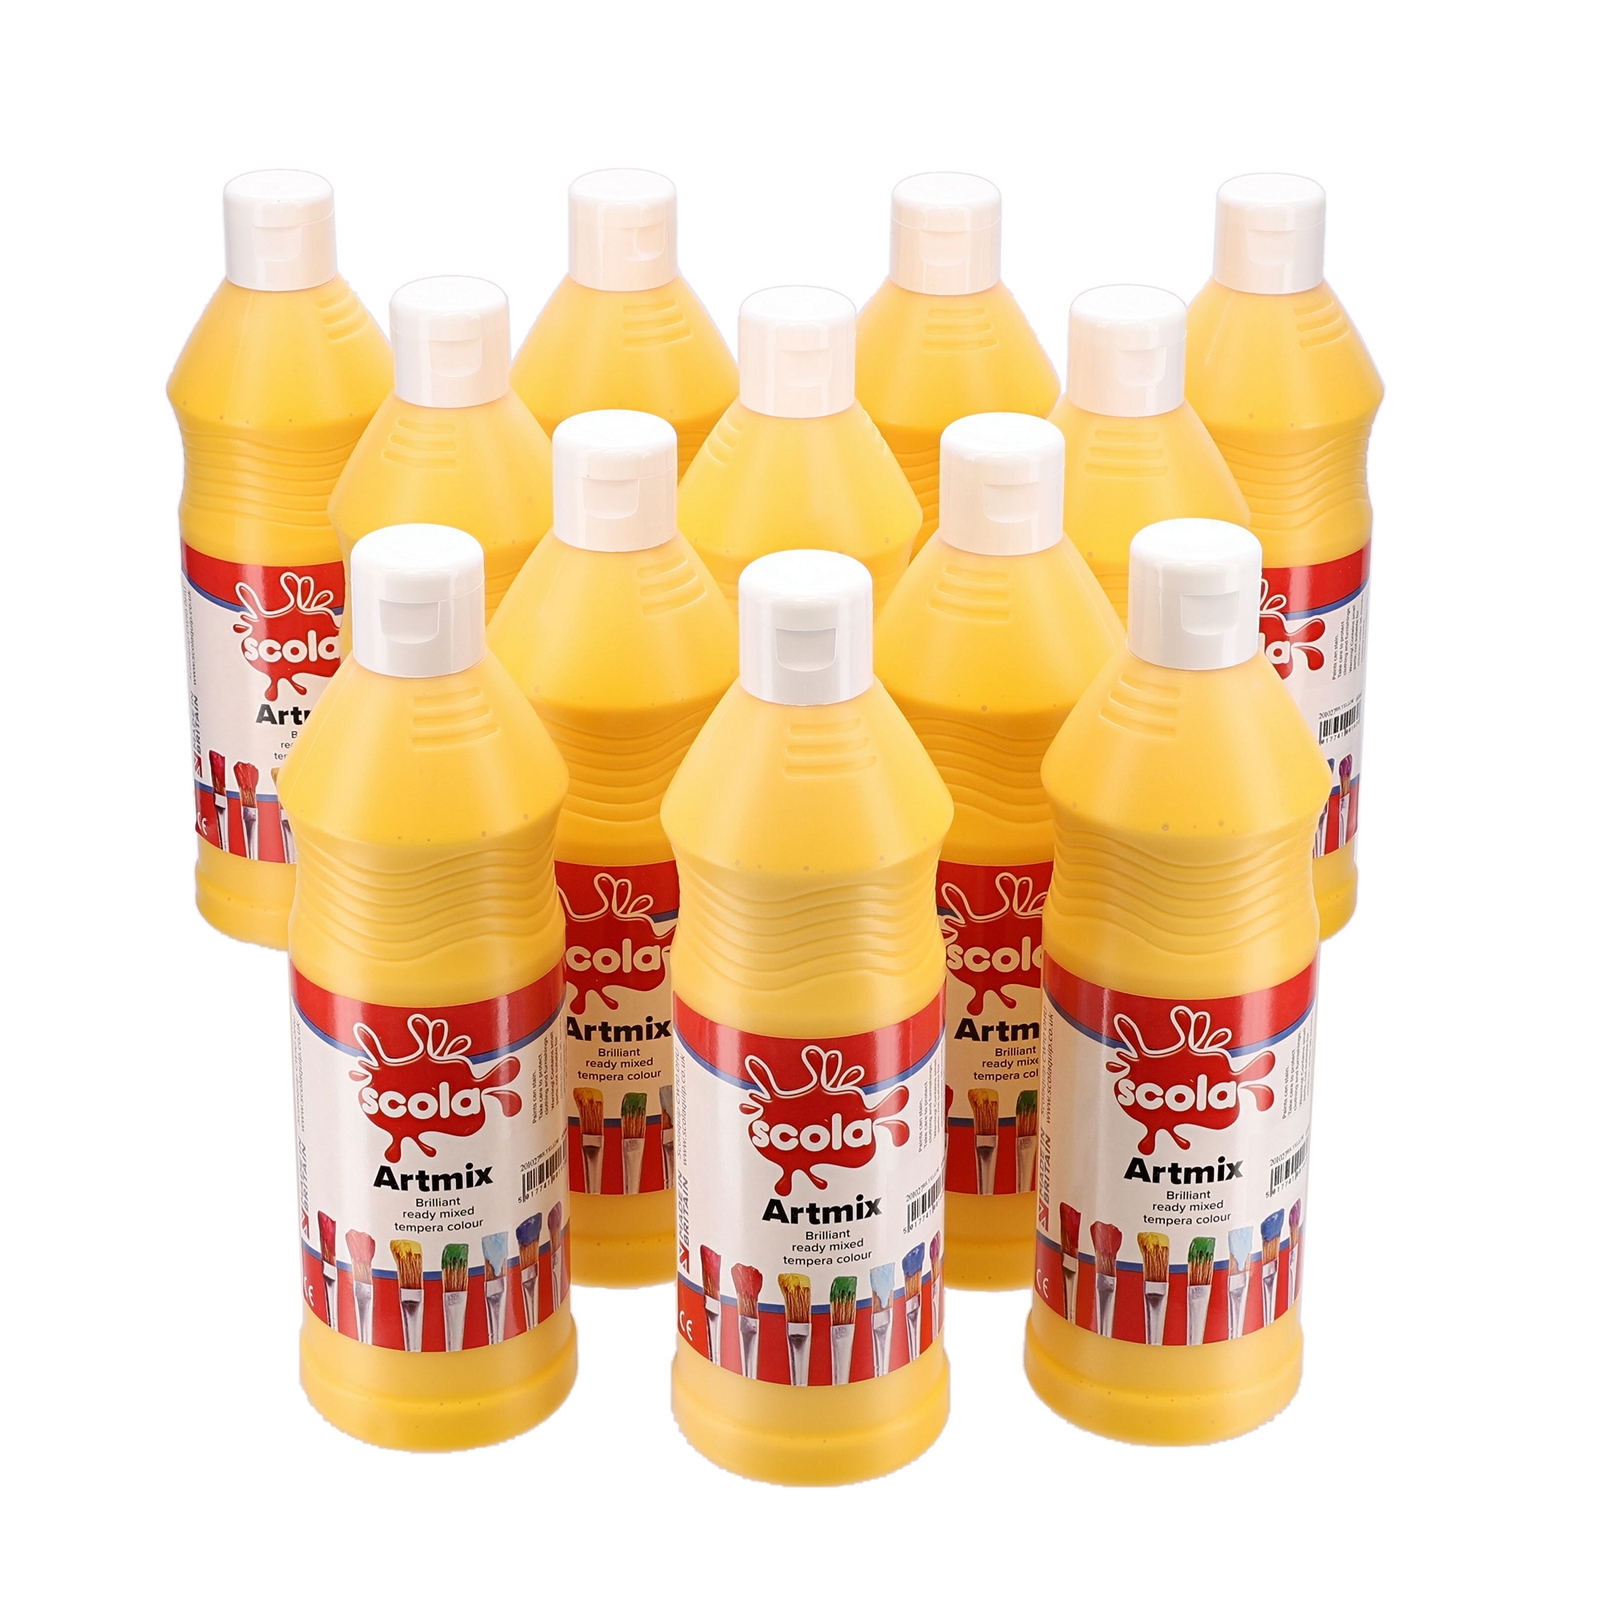 Scola Brilliant Yellow Artmix Ready Mixed Paint - 600ml - Pack of 12